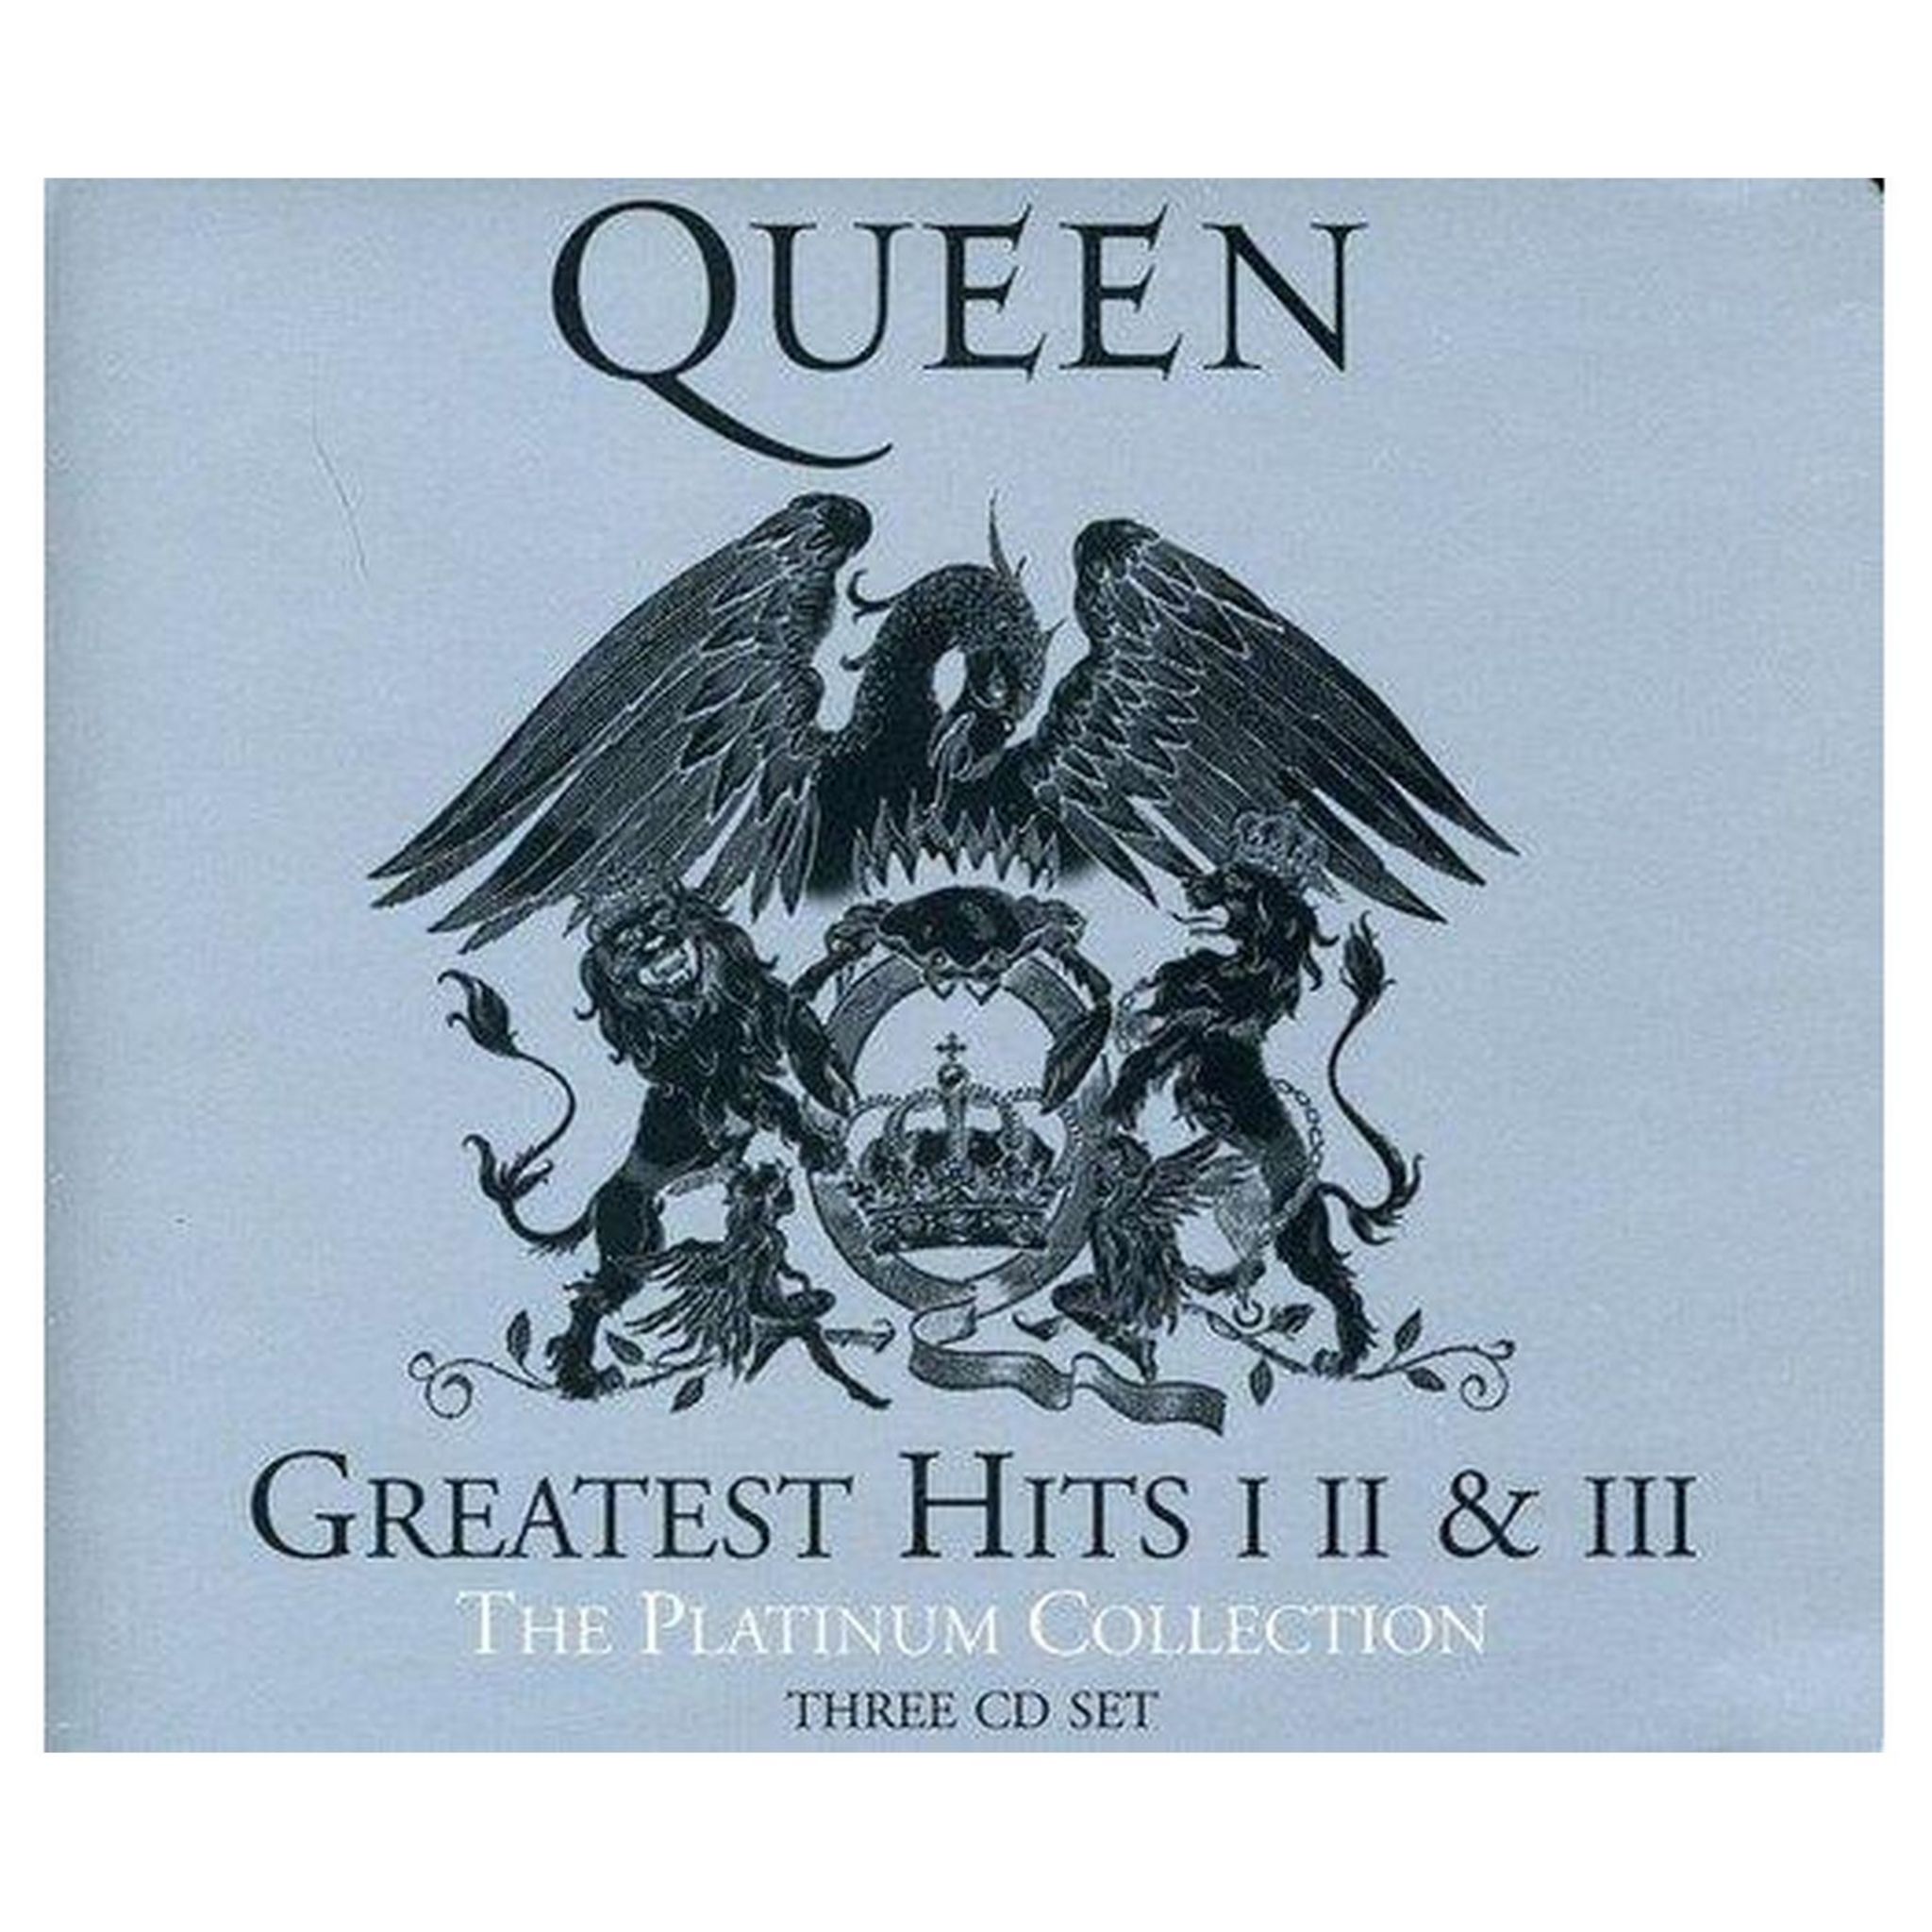 Greatest hits collection. Queen Greatest Hits обложка. Queen Platinum collection обложка. Обложка Queen the Platinum collection (2011 Remaster). Queen Greatest Hits 3 обложка.